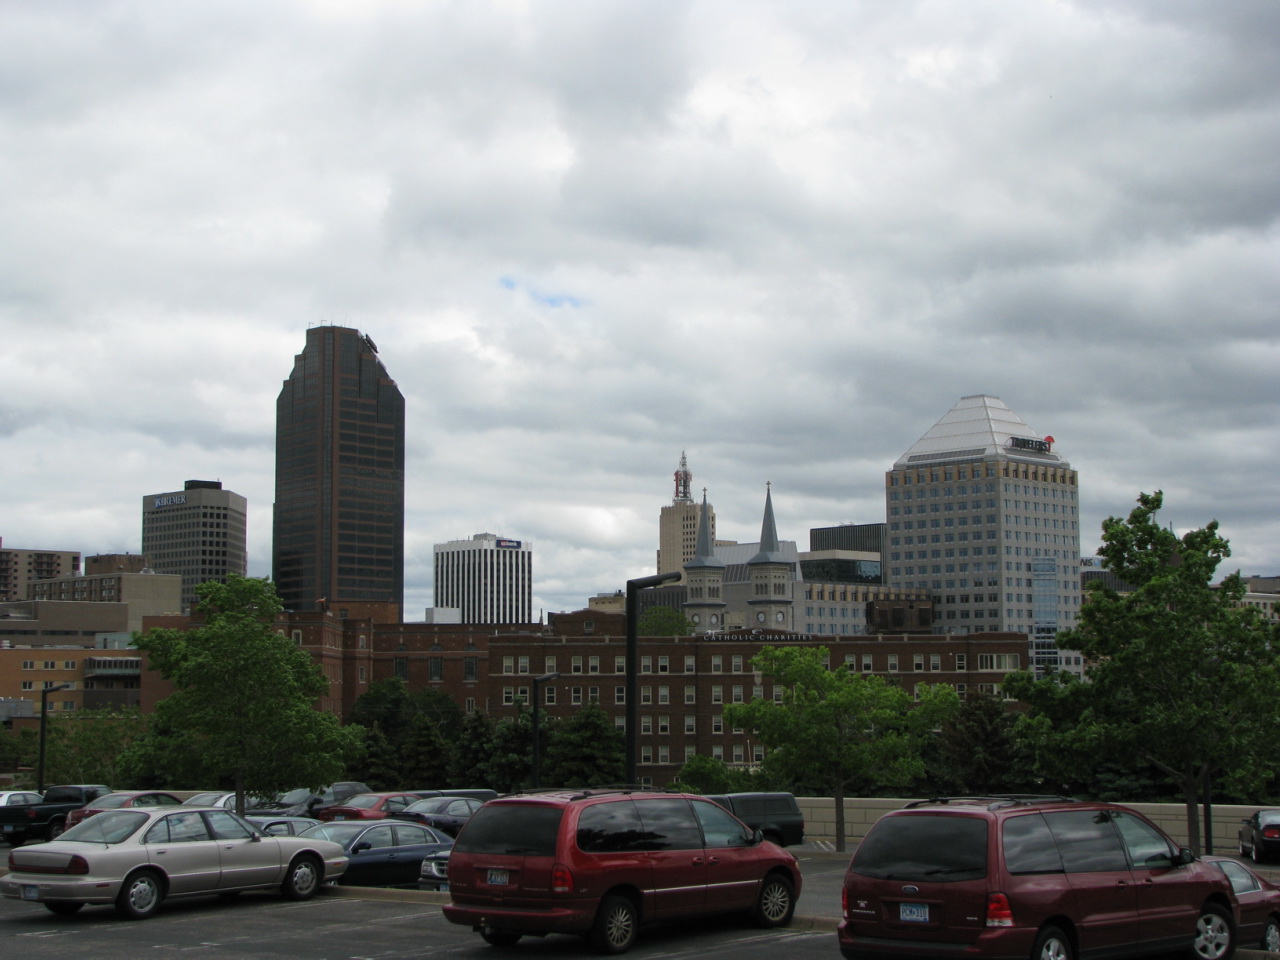 cars are parked in the lot next to a city with buildings